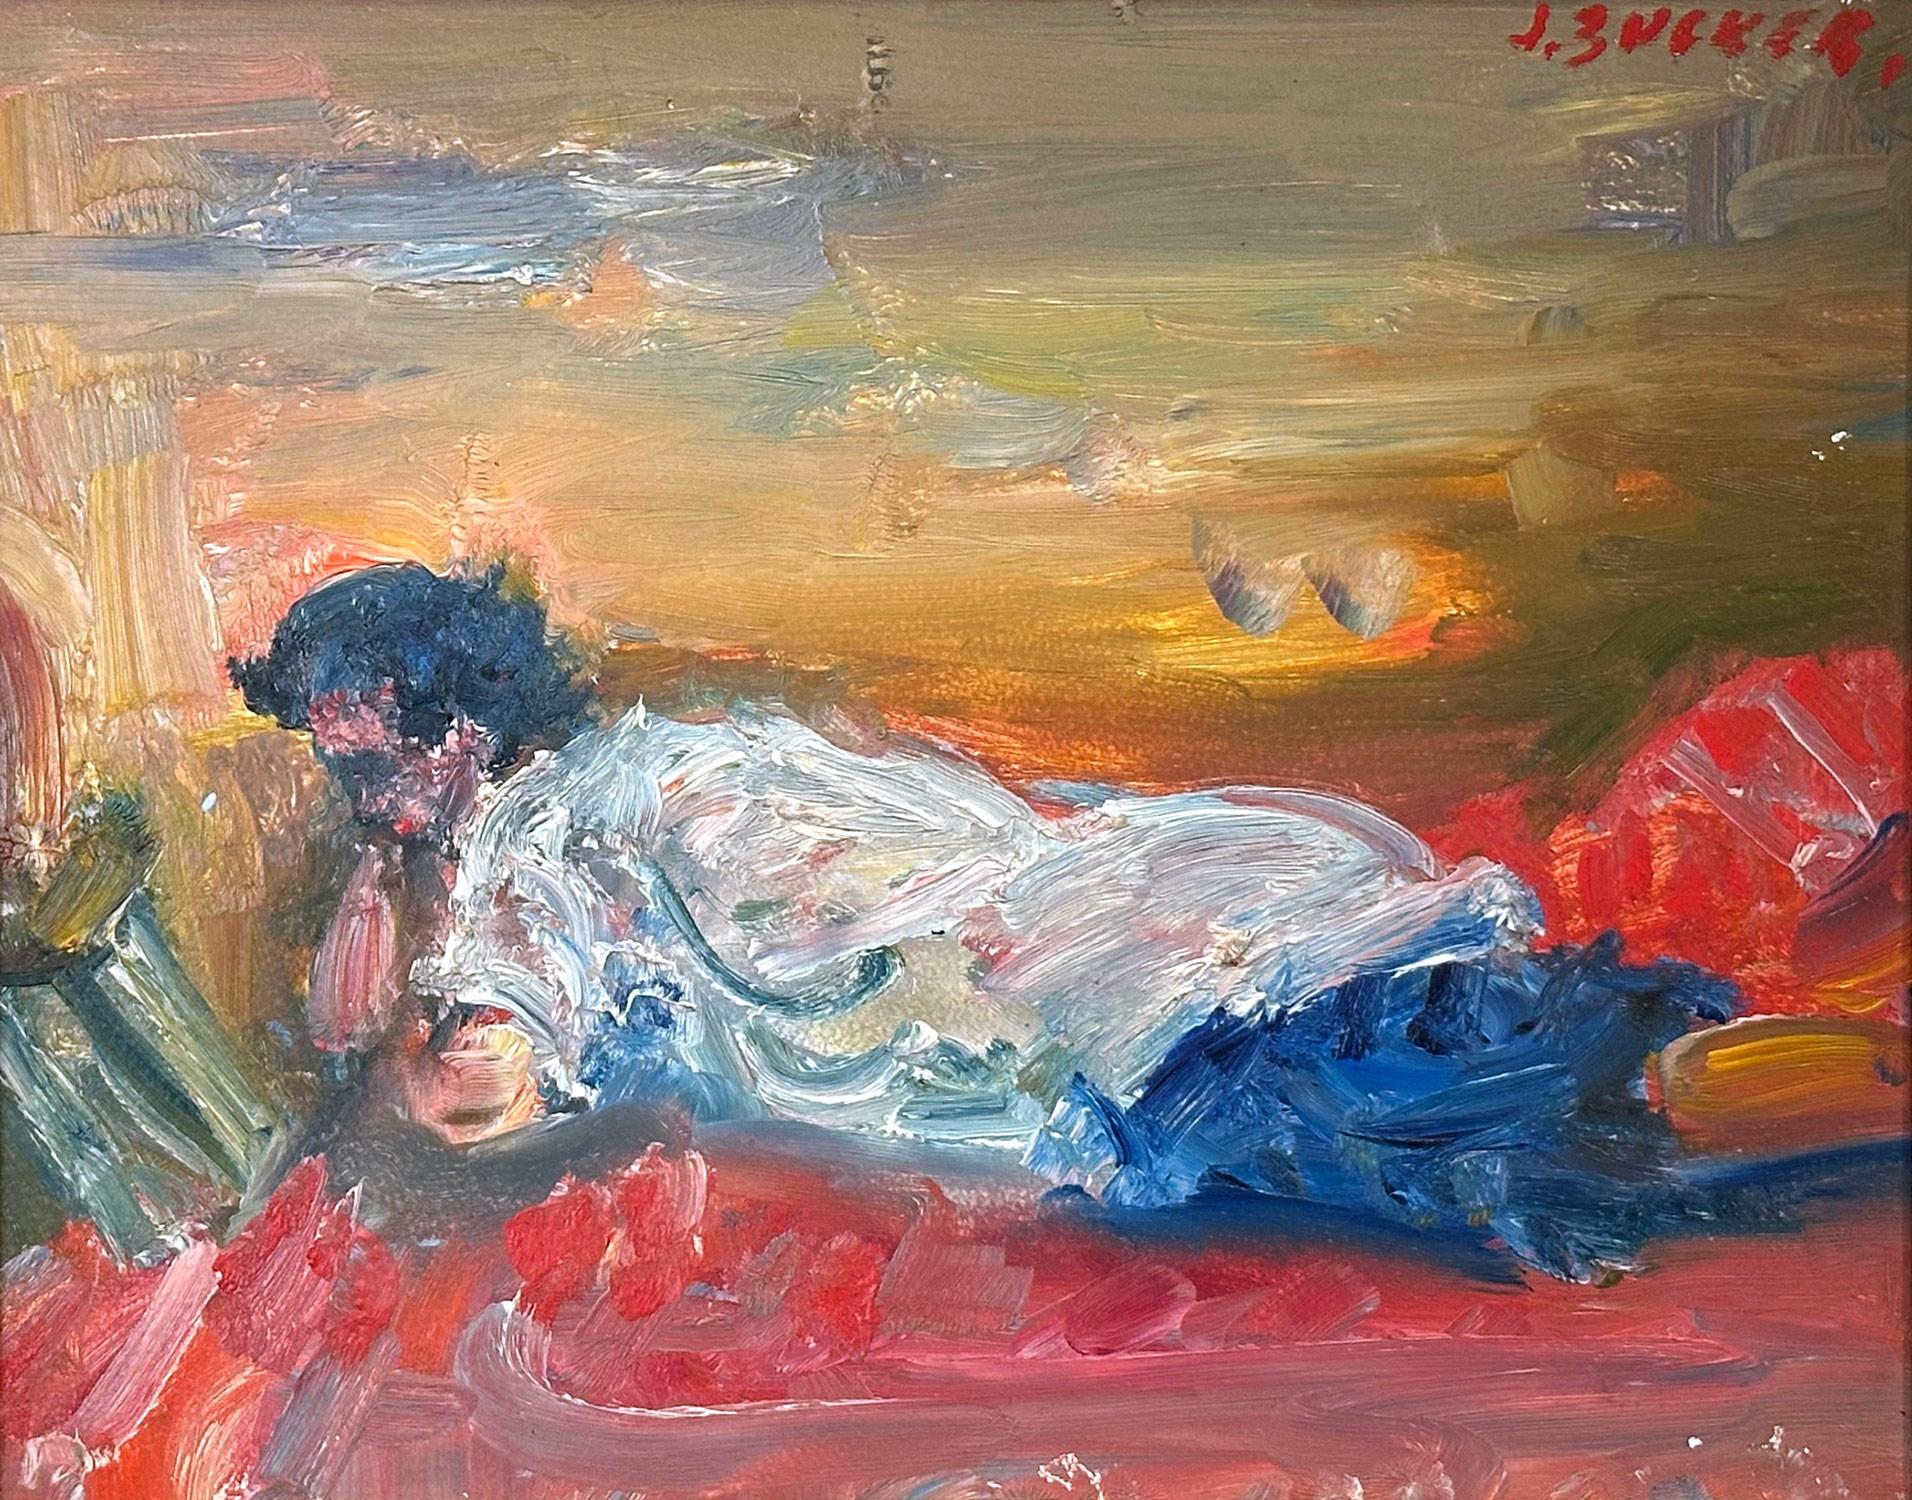 This painting depicts a whimsical scene of a figure reclining and reading. The figure is done in a quick way, where the scene almost is abstracted. The bright colors and quick brush strokes are what makes this painting so attractive and desirable.